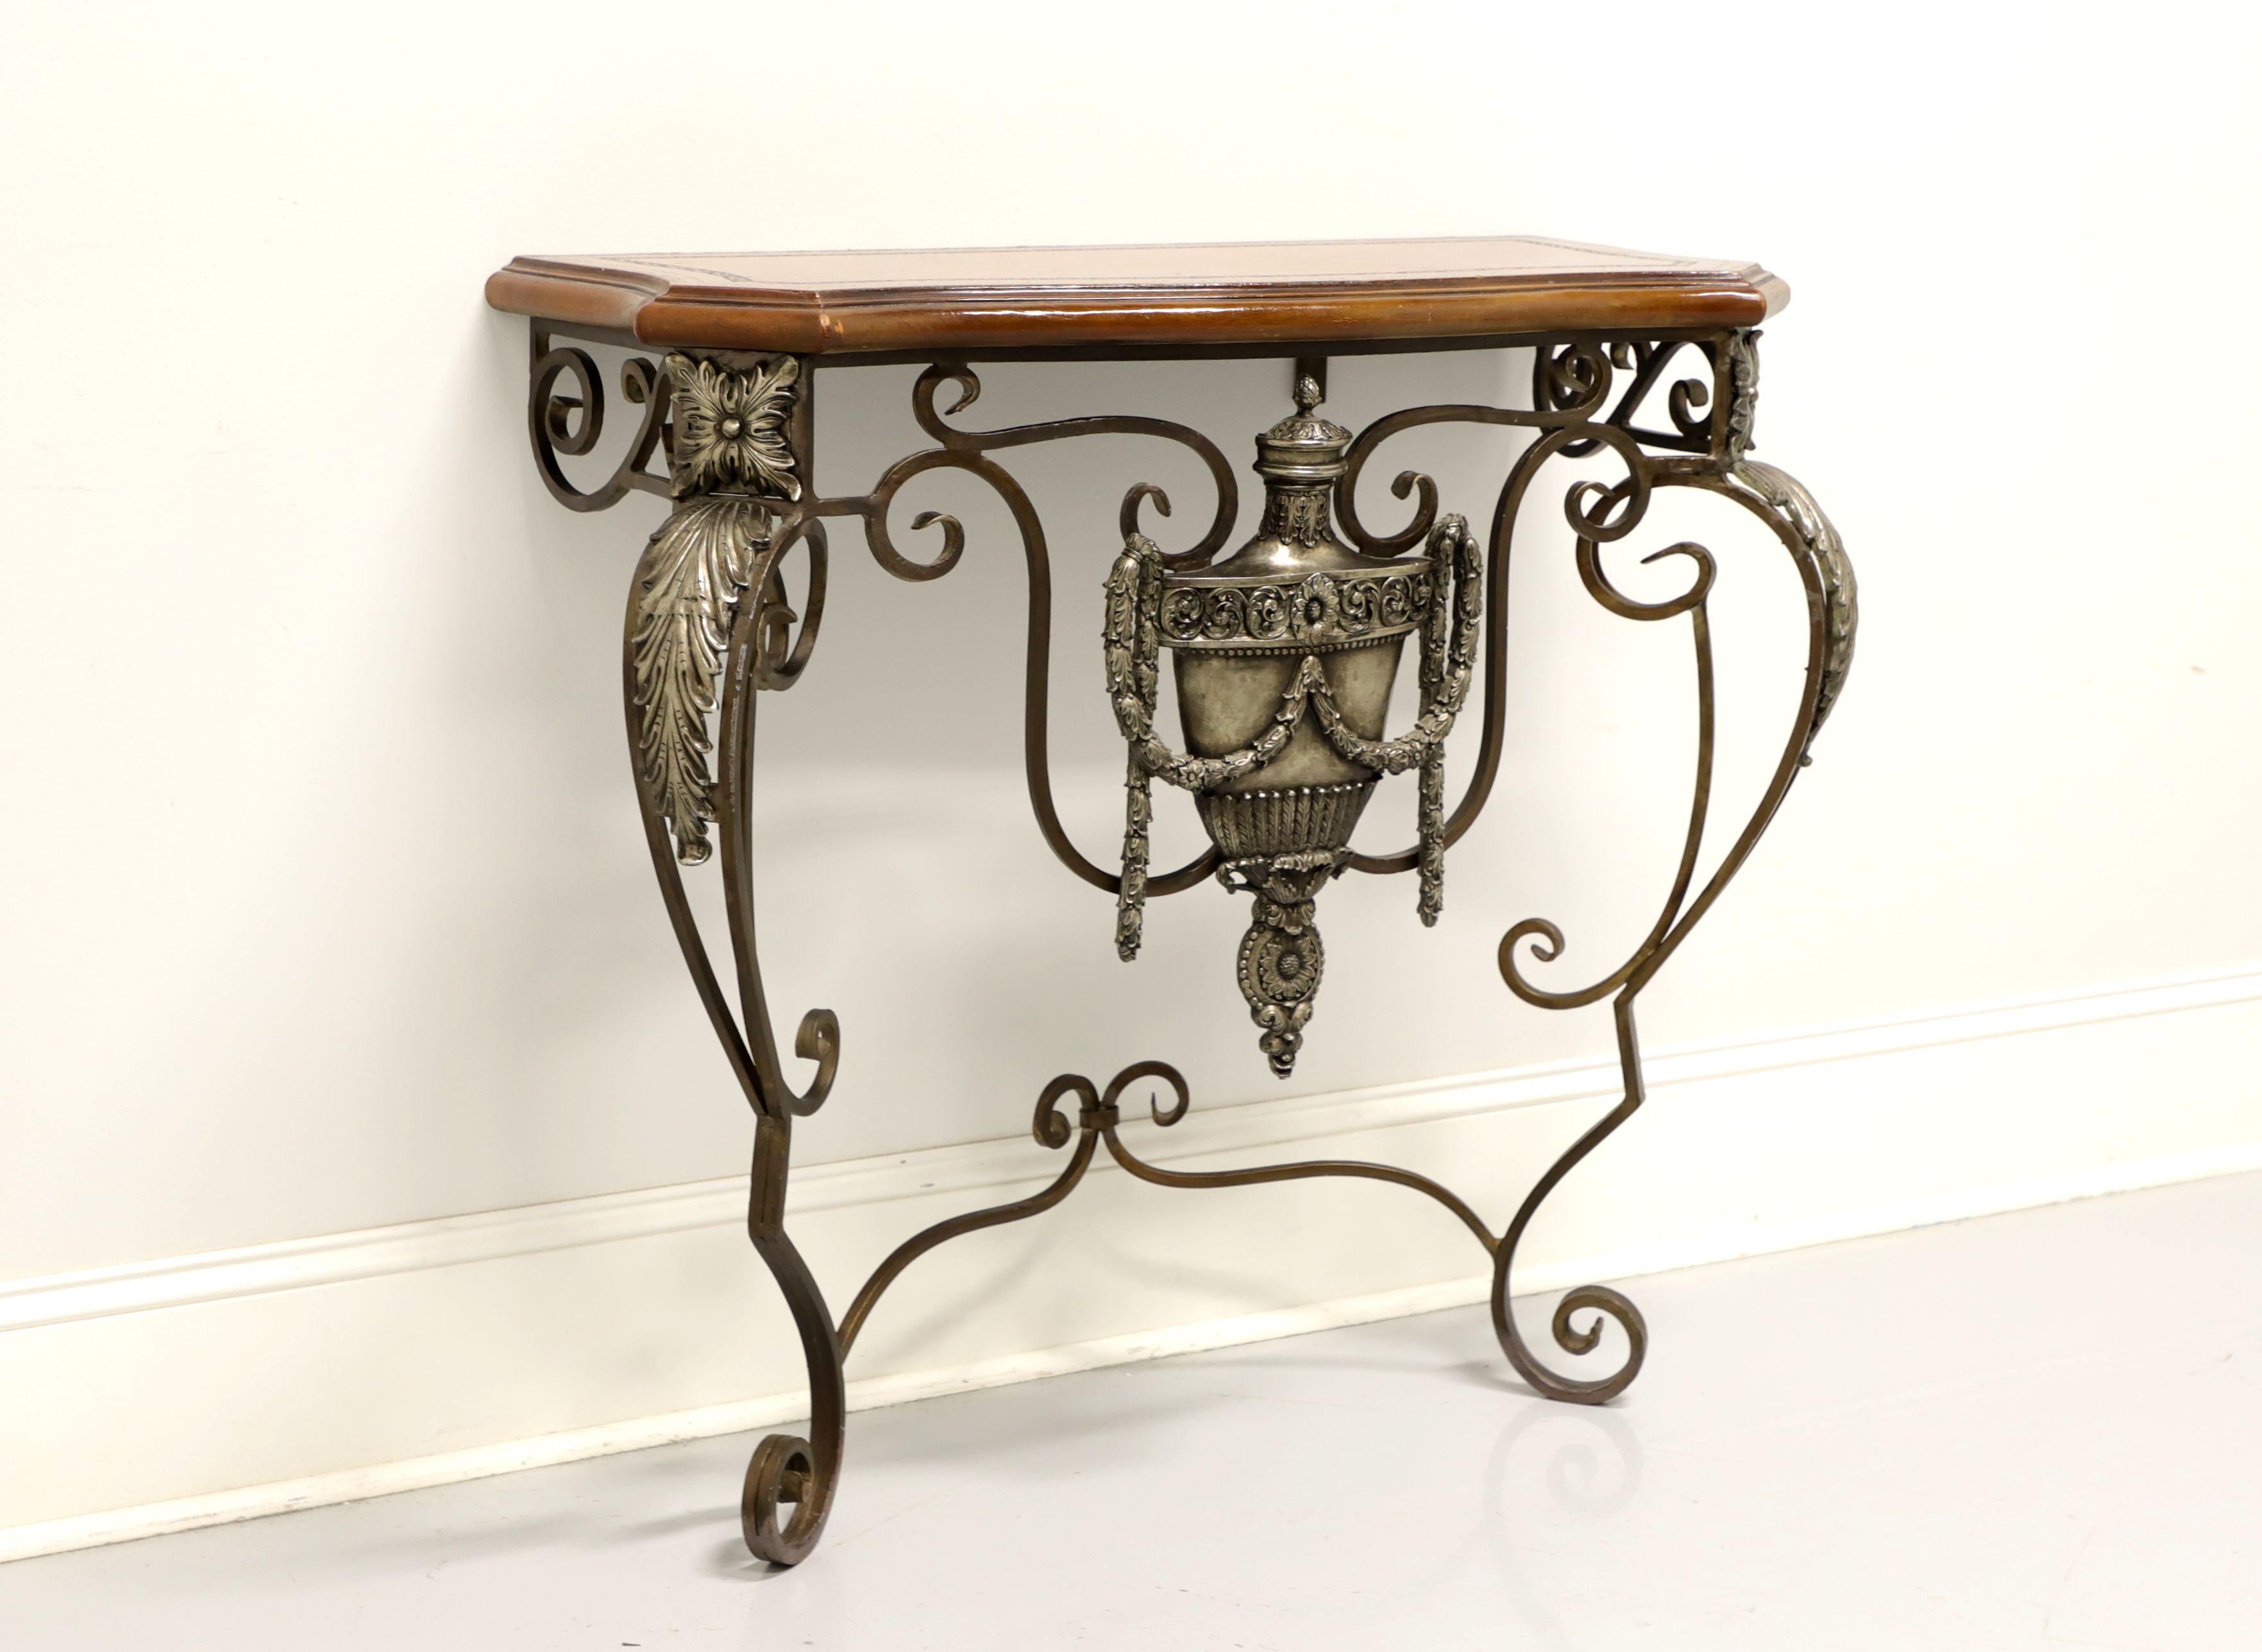 A French style pier table by Maitland Smith. Ornate iron frame with tooled leather top. Features a decorative shield with swags to center, acanthus leaves to knees and curled feet. Wall mounted with two screws. Made in the Philippines, in the late